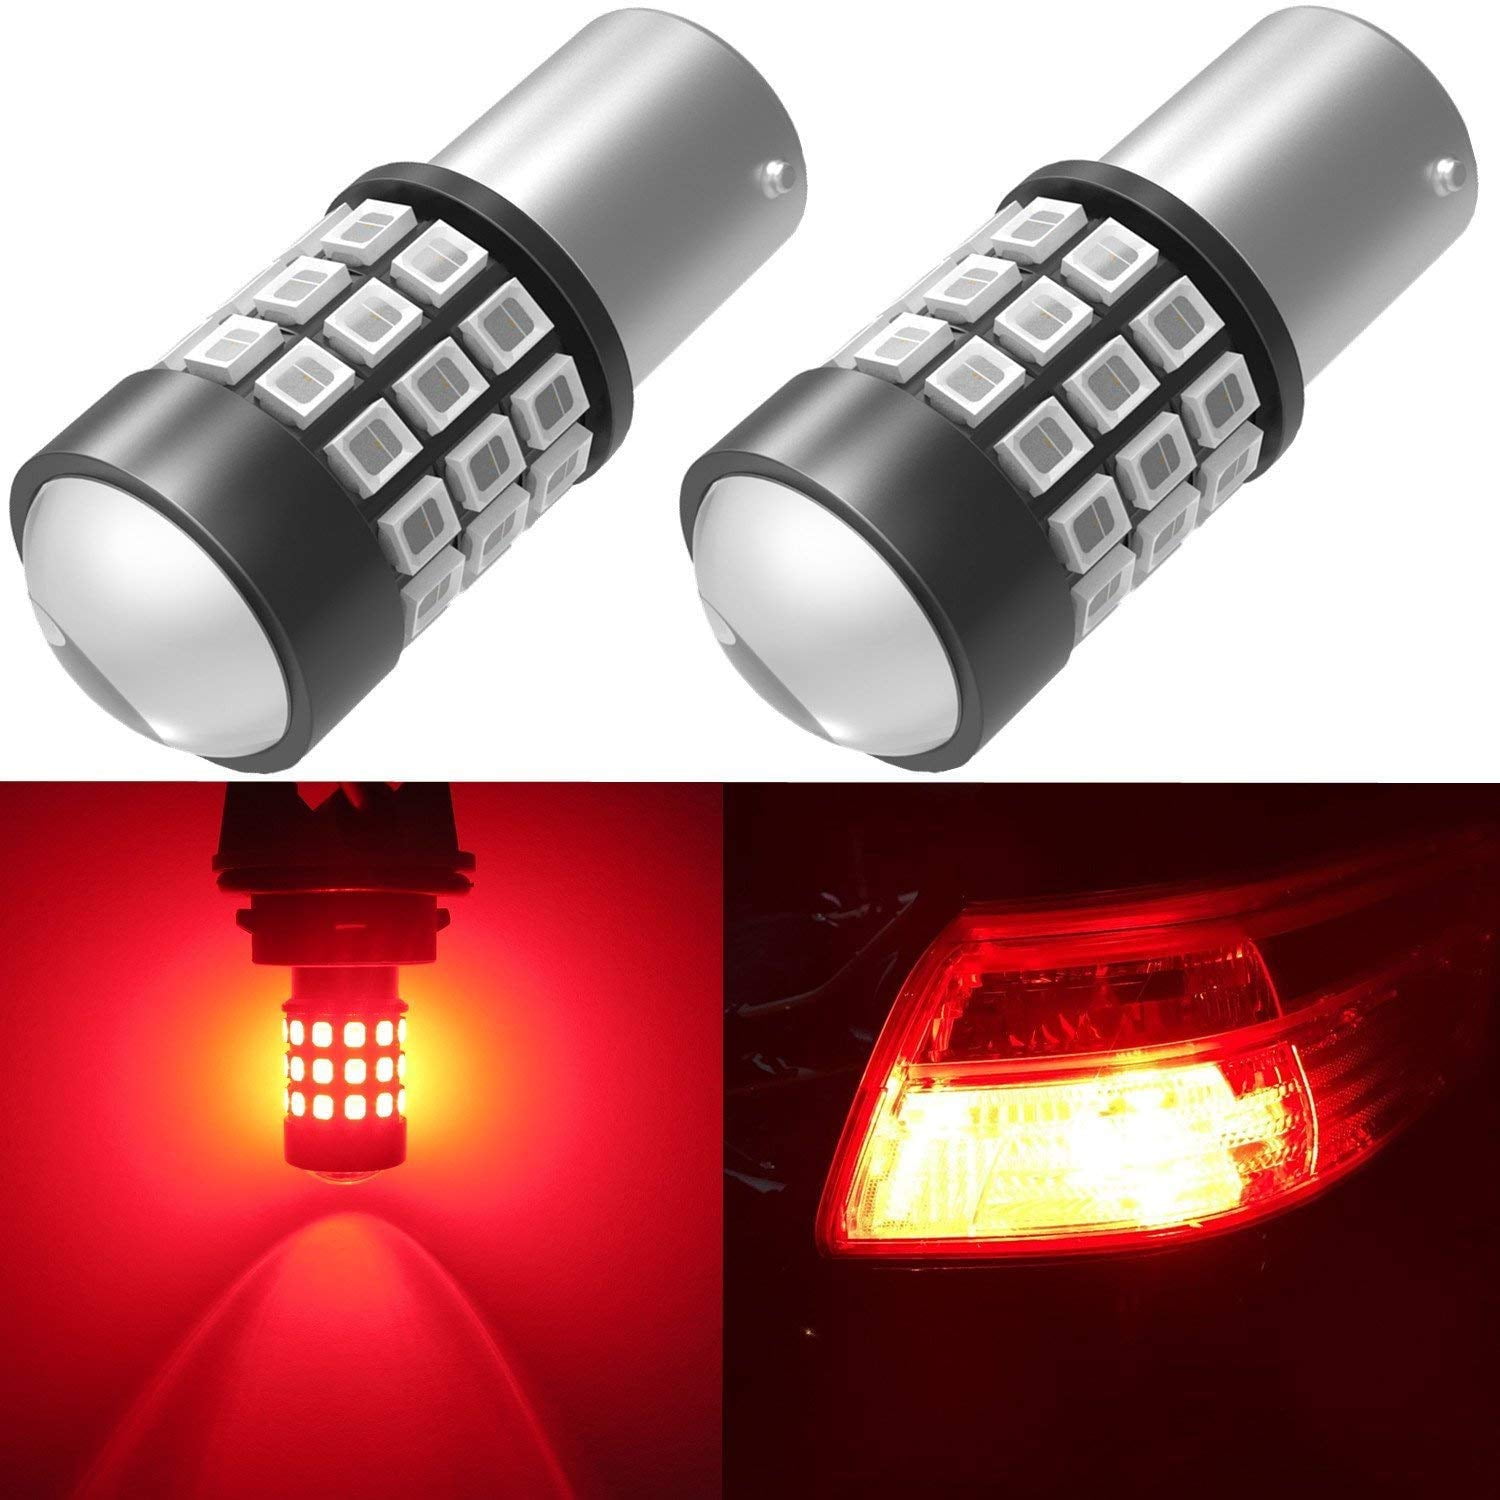 TAIL LIGHT REPLACEMENT BULB 1157 BASE ADD ON LED-1157R  RED L.E.D 